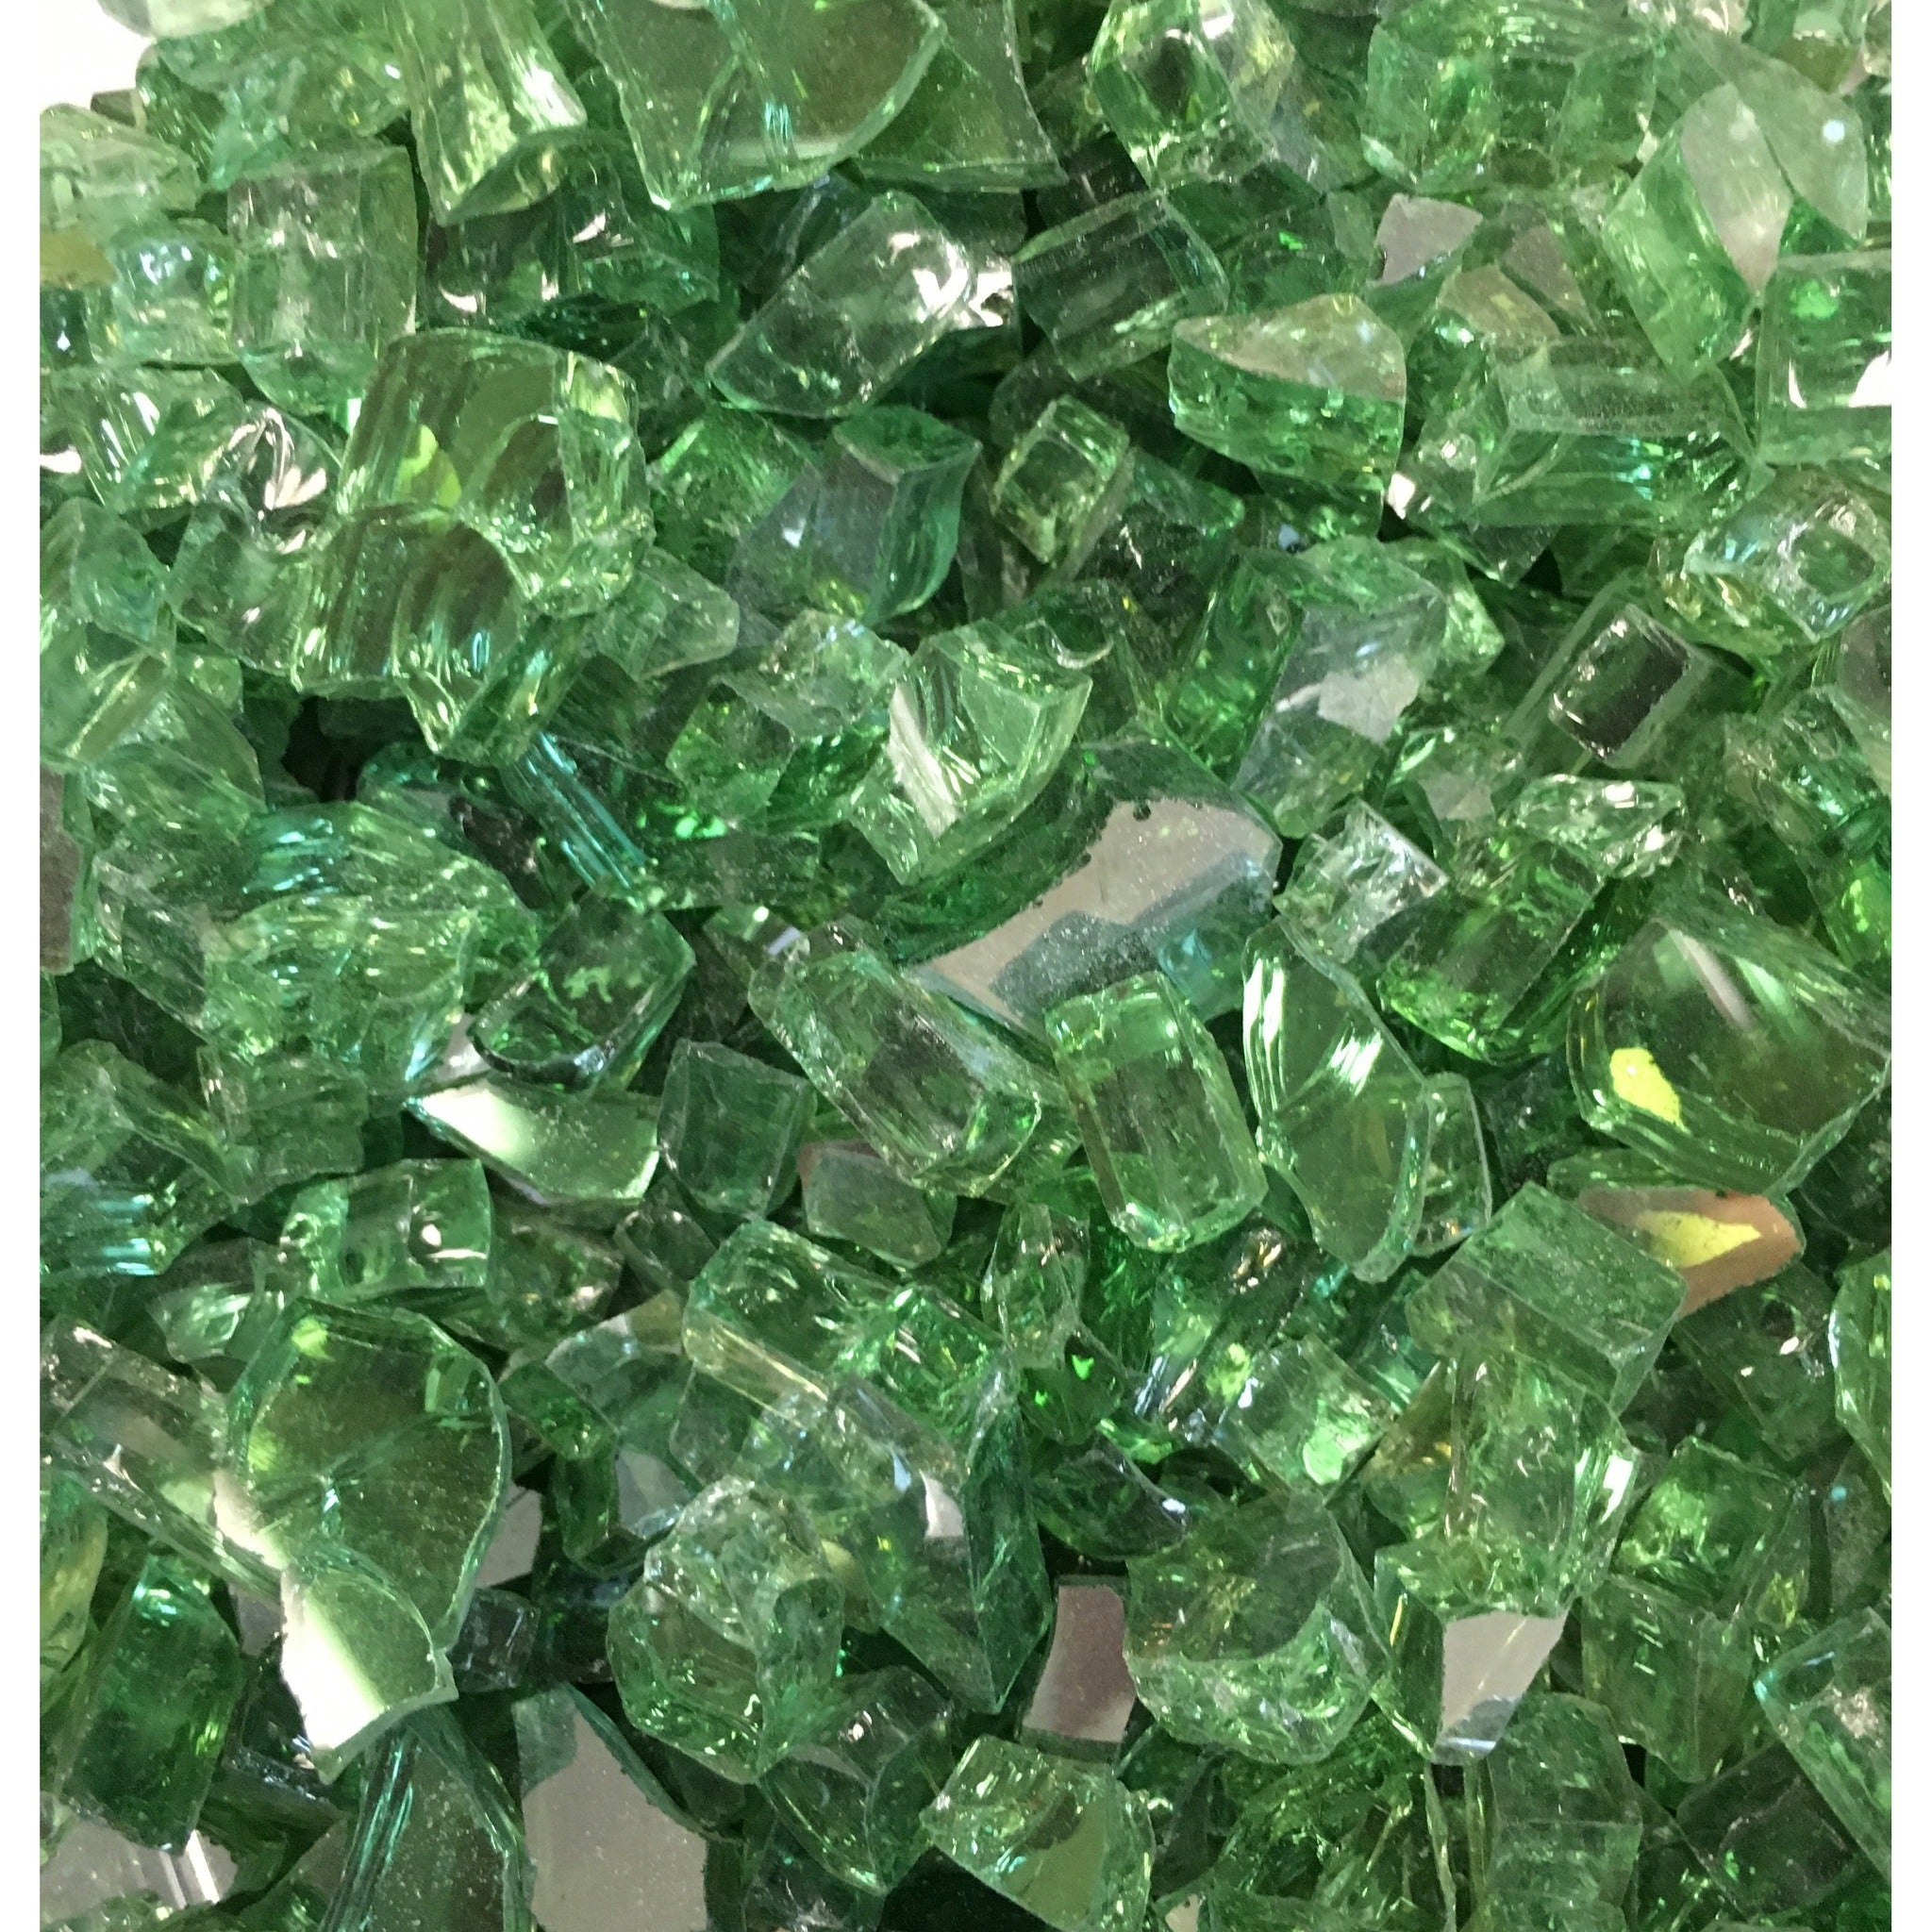 Sodee Reflective Crushed Glass/Fire Pits for Resin Art (Clear) (500 Gm) -  Epoxy resin Moulds 